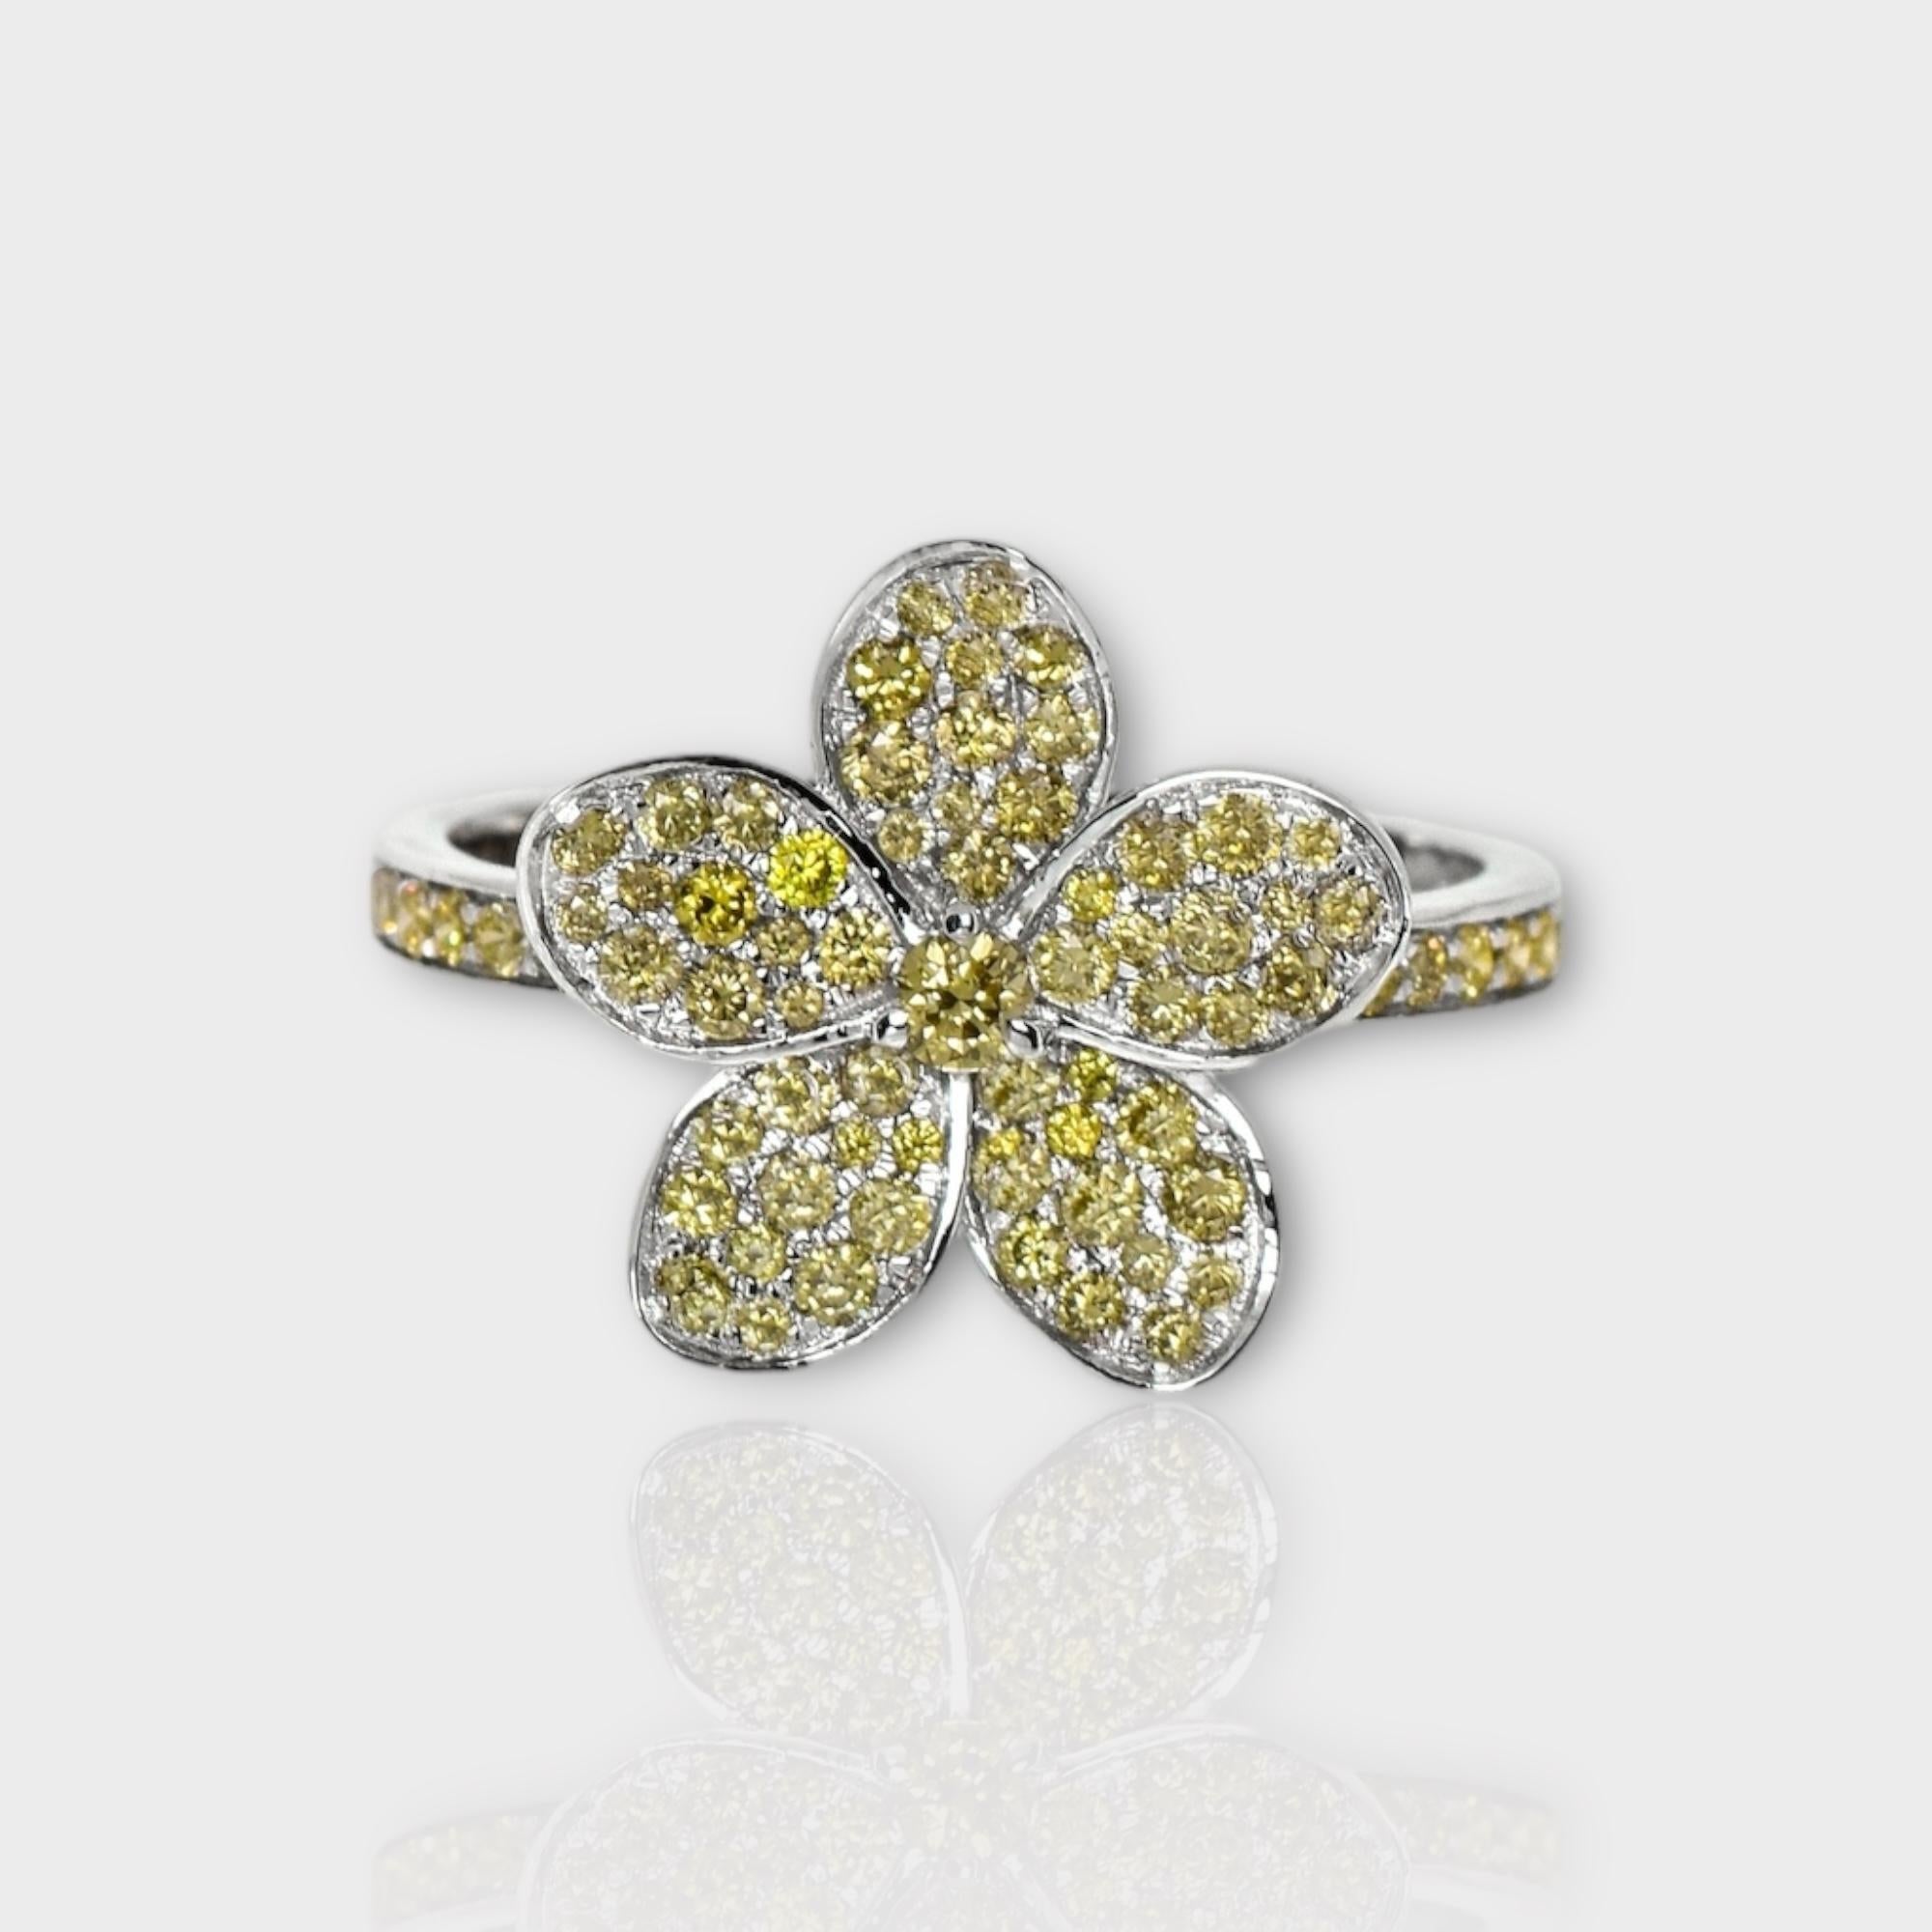 *IGI 14K 0.66 ct Natural Greenish Yellow Diamond Flower Design Engagement Ring*

This band features a stunning design with flowers crafted from 14K white gold. It is set with natural, intense greenish-yellow diamonds weighing 0.66 carats.

This ring